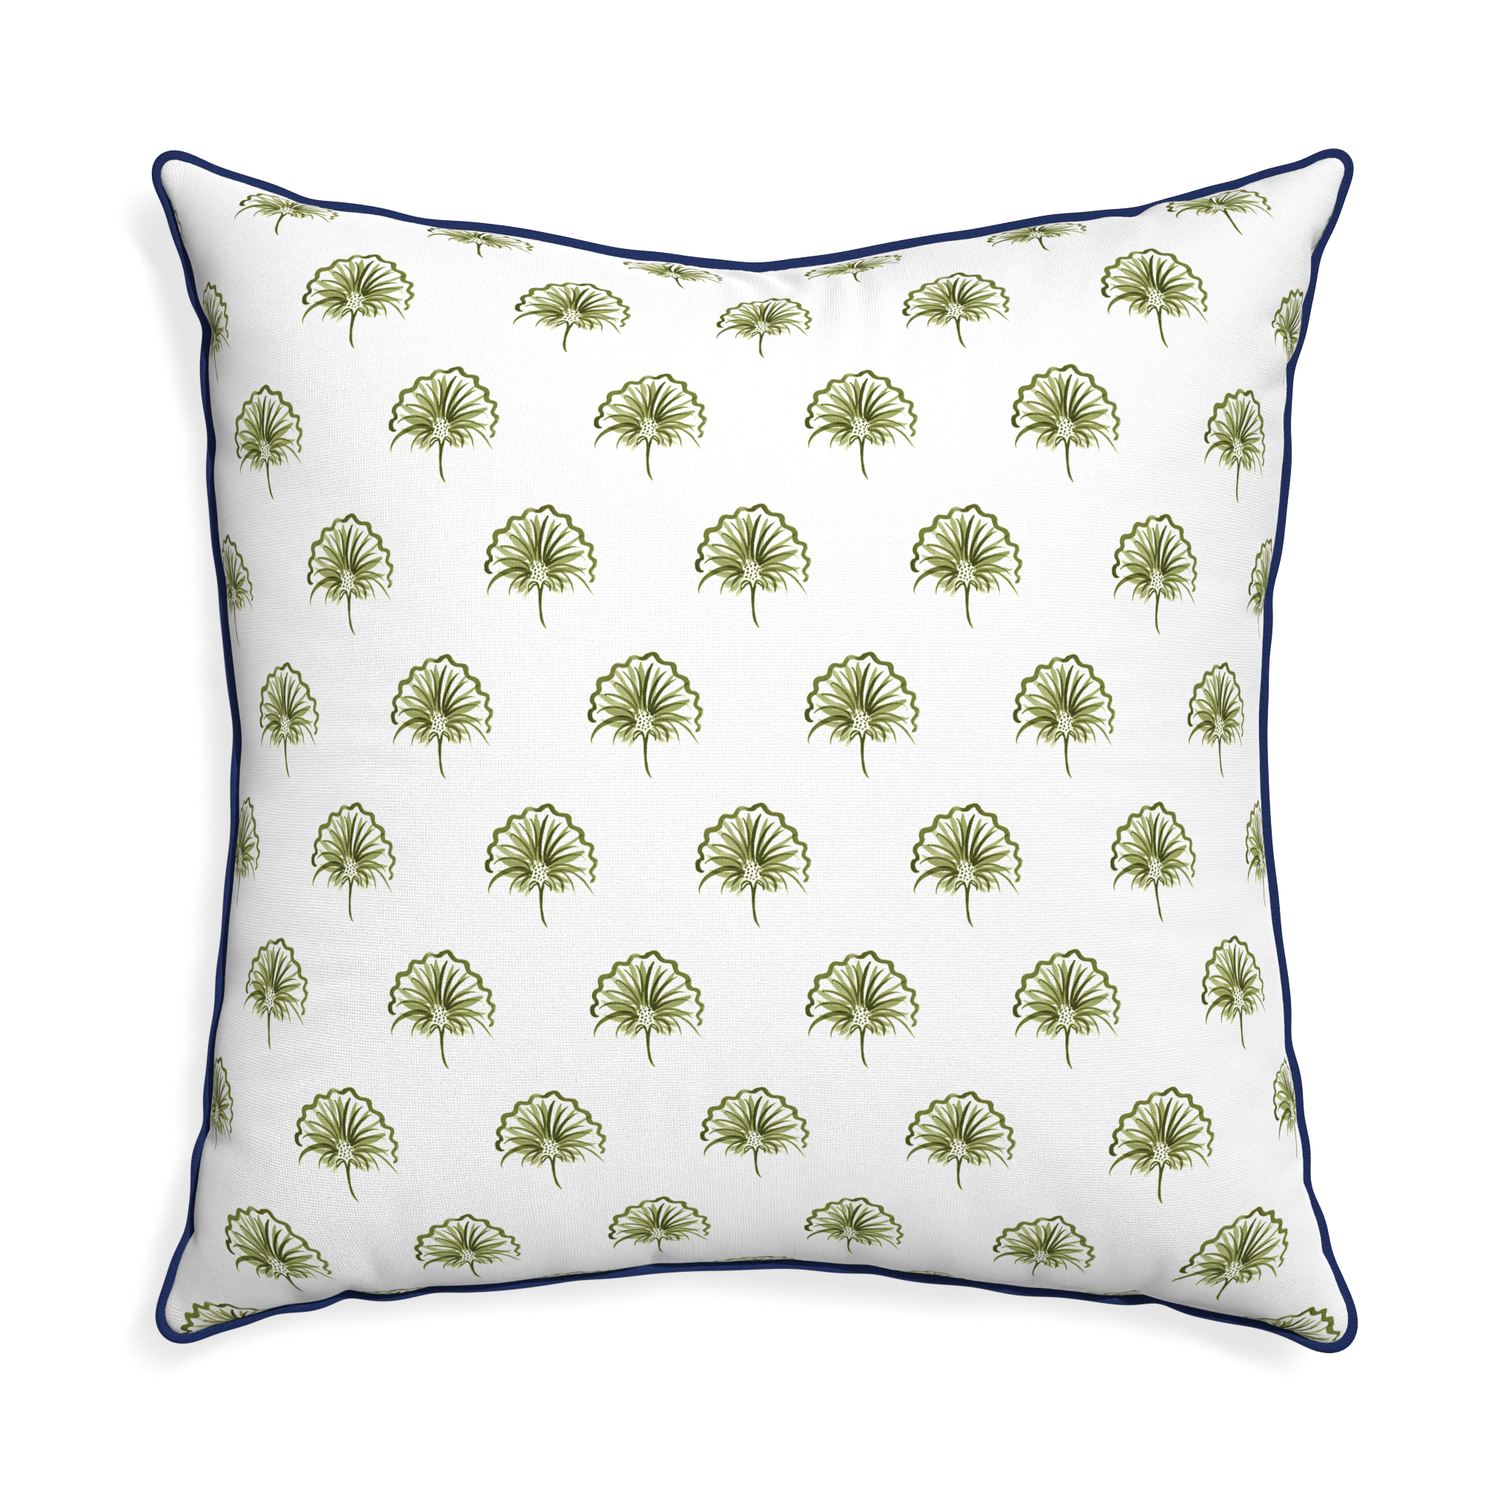 Euro-sham penelope moss custom pillow with midnight piping on white background